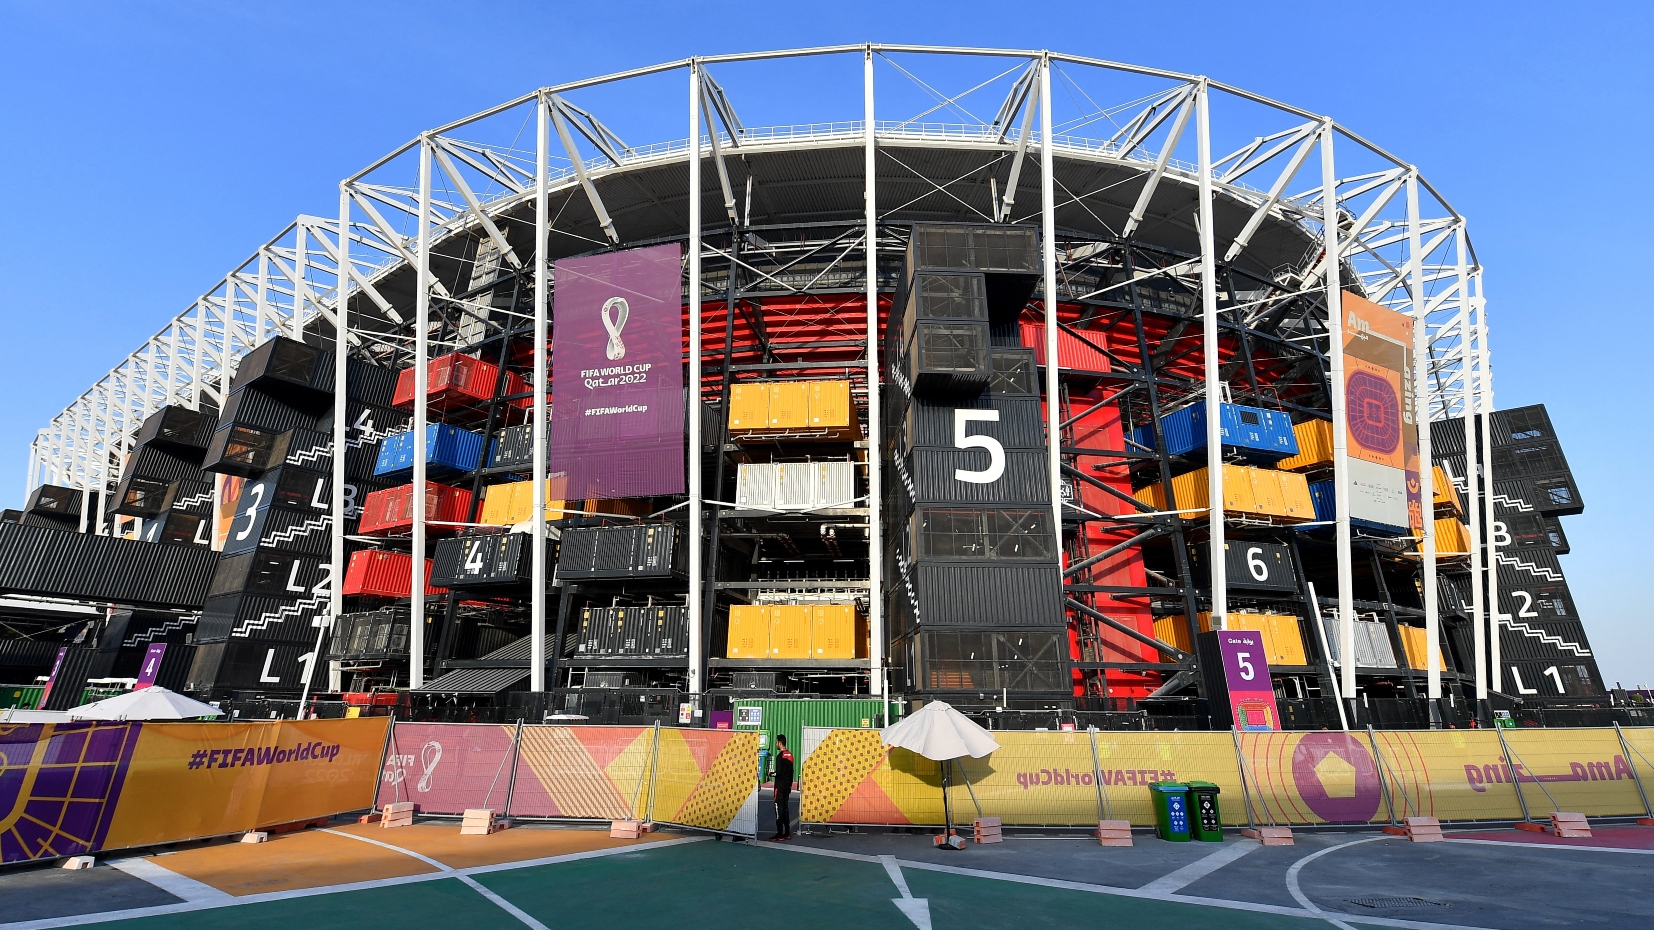 Stadium 974 is made of containers and will be dismantled after the World Cup. /Jennifer Lorenzini/Reuters